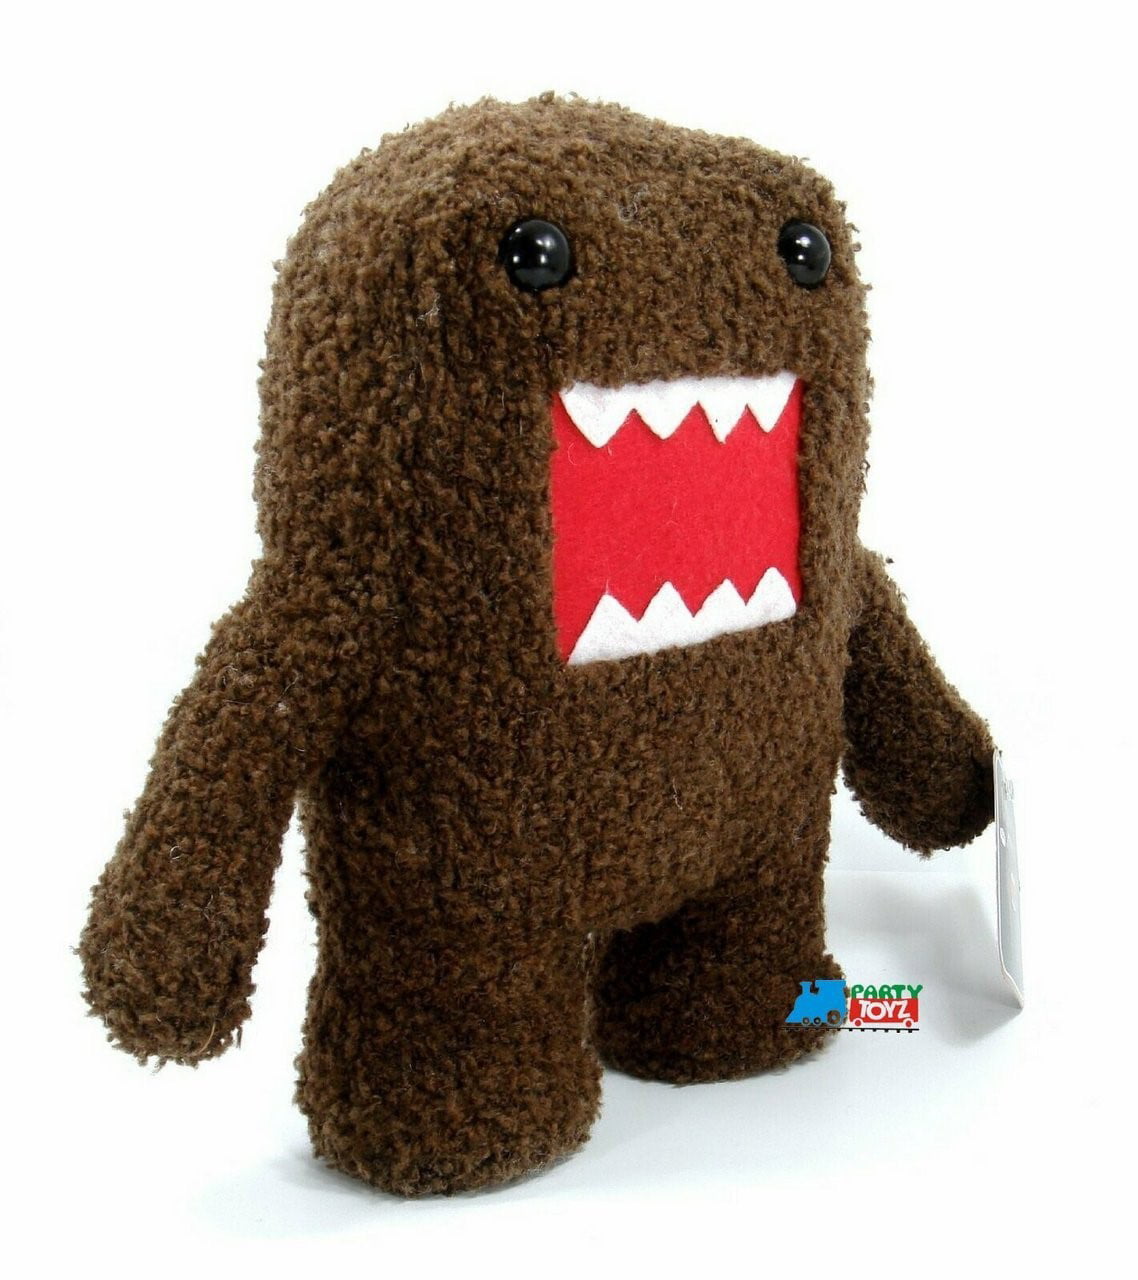 Details about   CLASSIC BROWN DOMO 6" Plush STUFFED ANIMAL Toy 